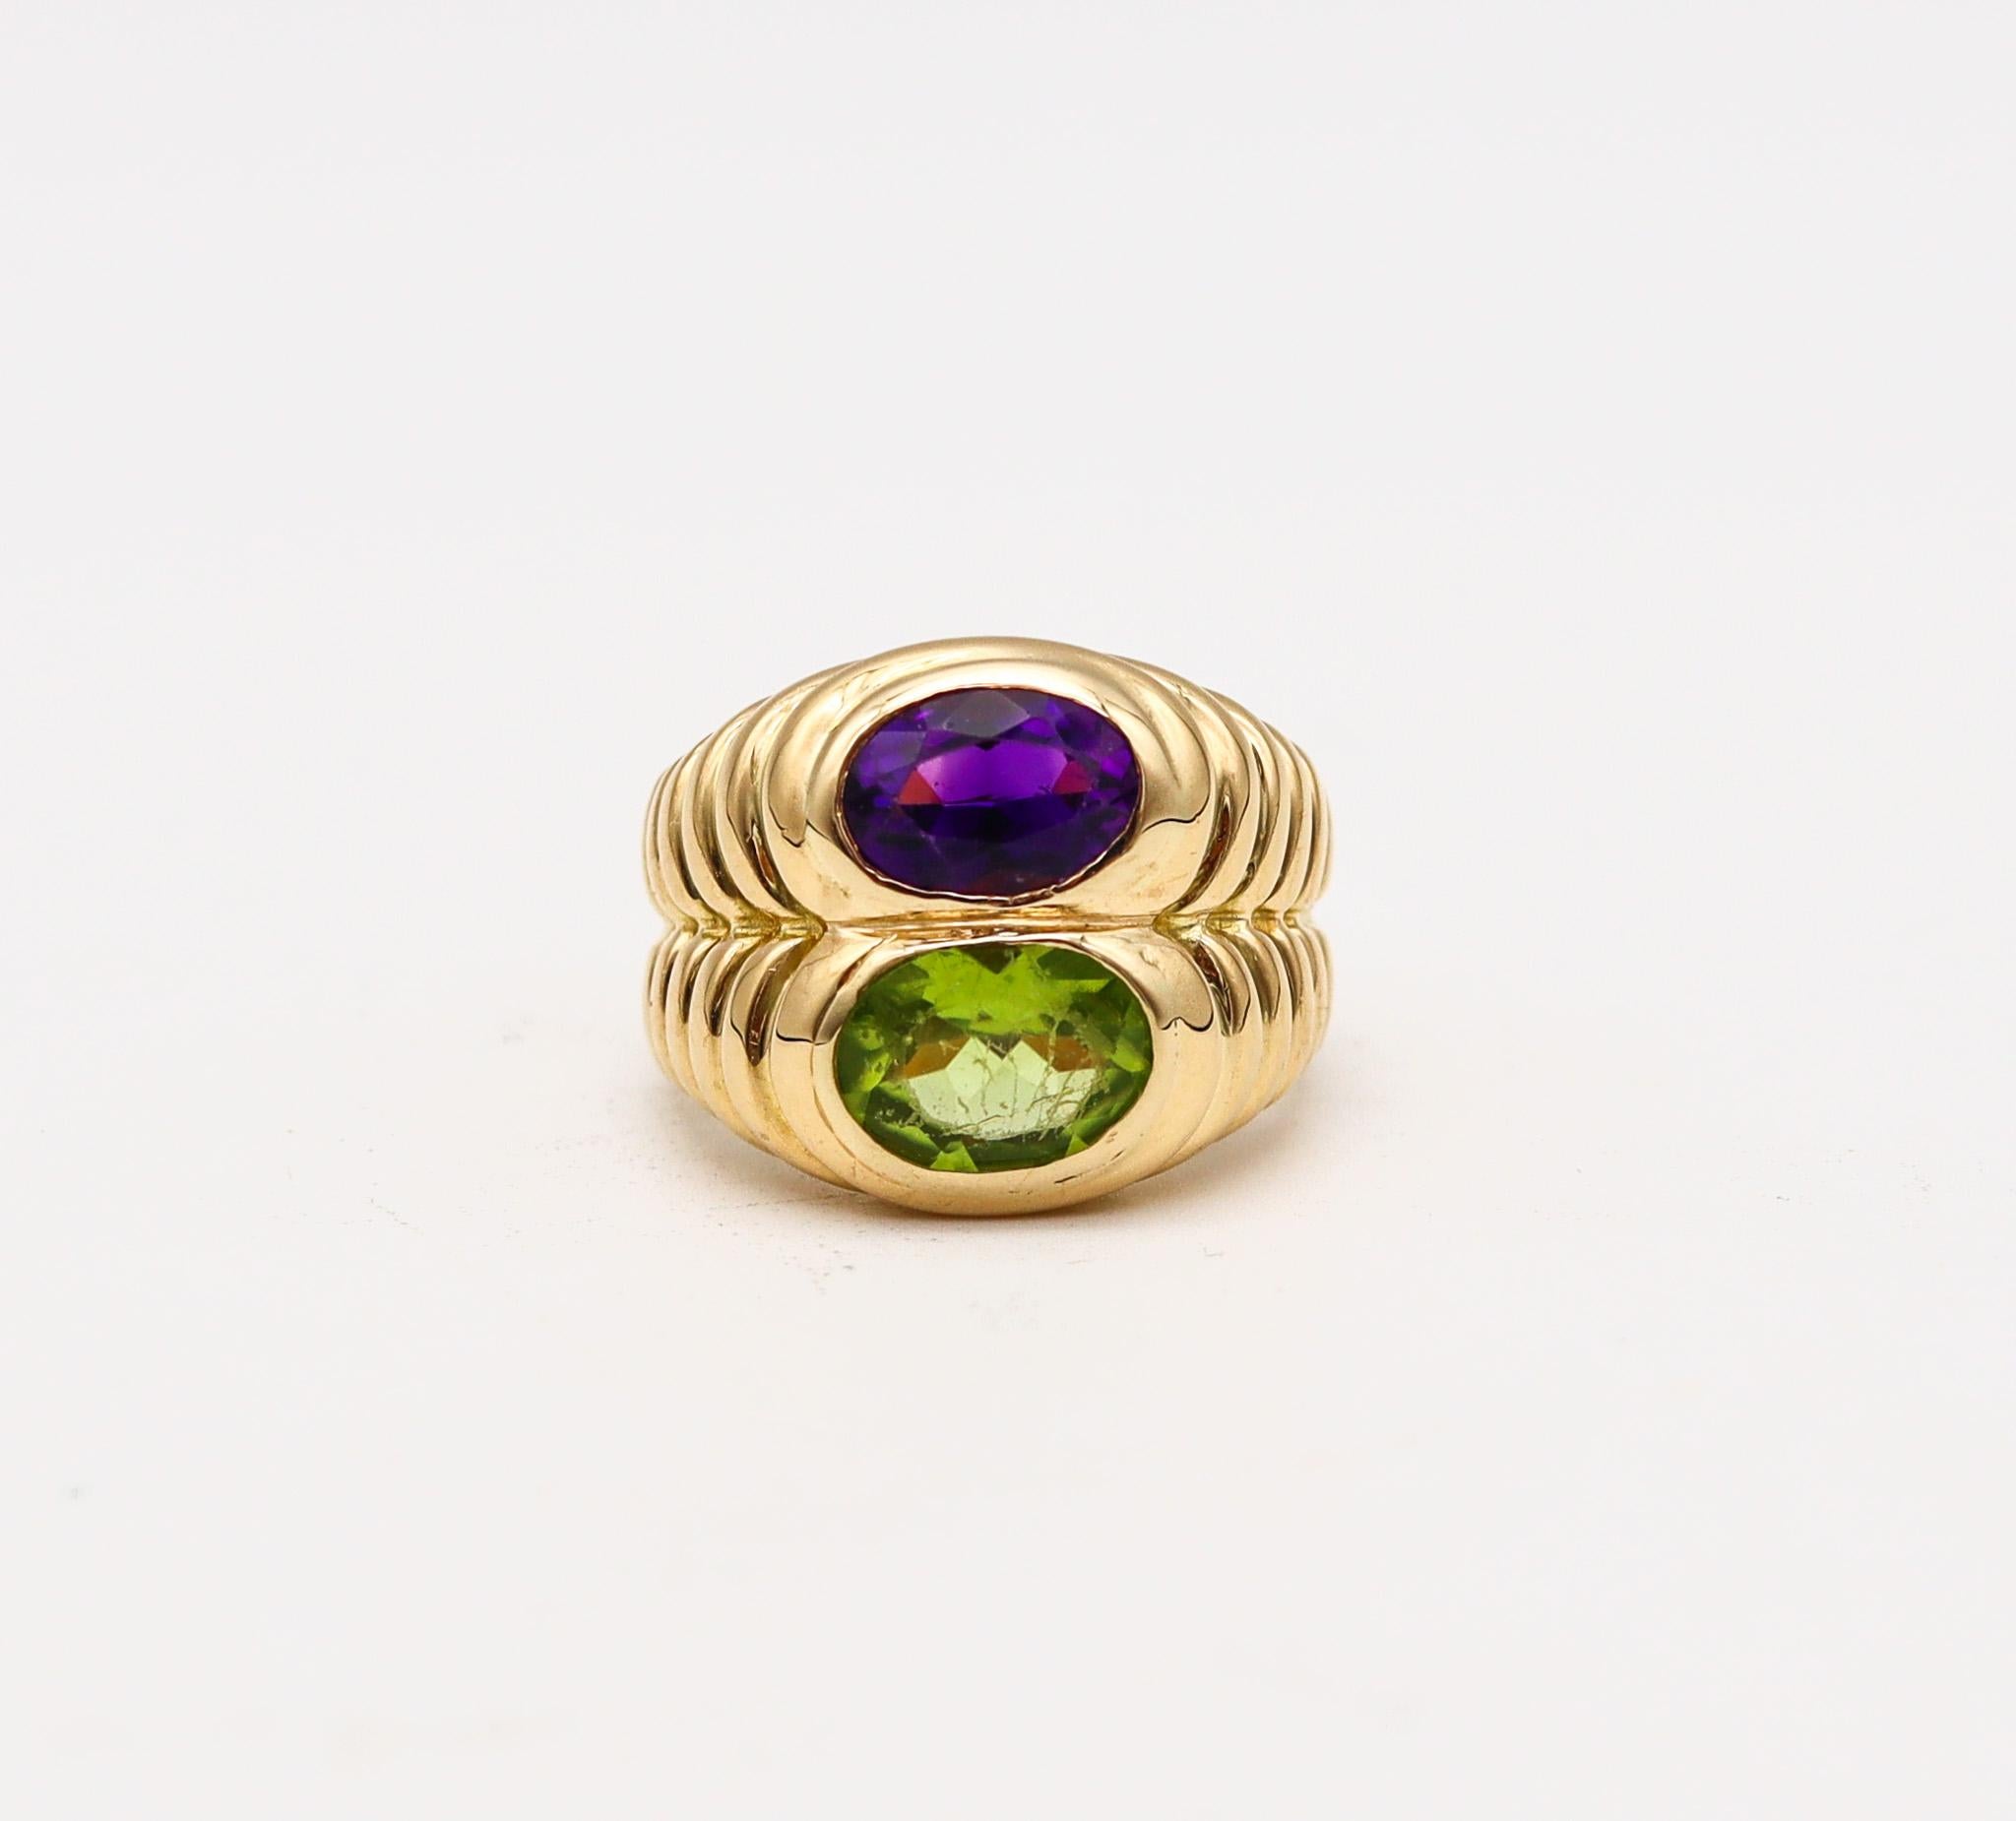 A gem-set doppio ring designed by Bvlgari.

Beautiful piece of jewelry, created in Rome Italy by the acclaimed jewelry house of Bvlgari. This popular ring is part of the iconic doppio collection and  was carefully crafted with stepped patterns in